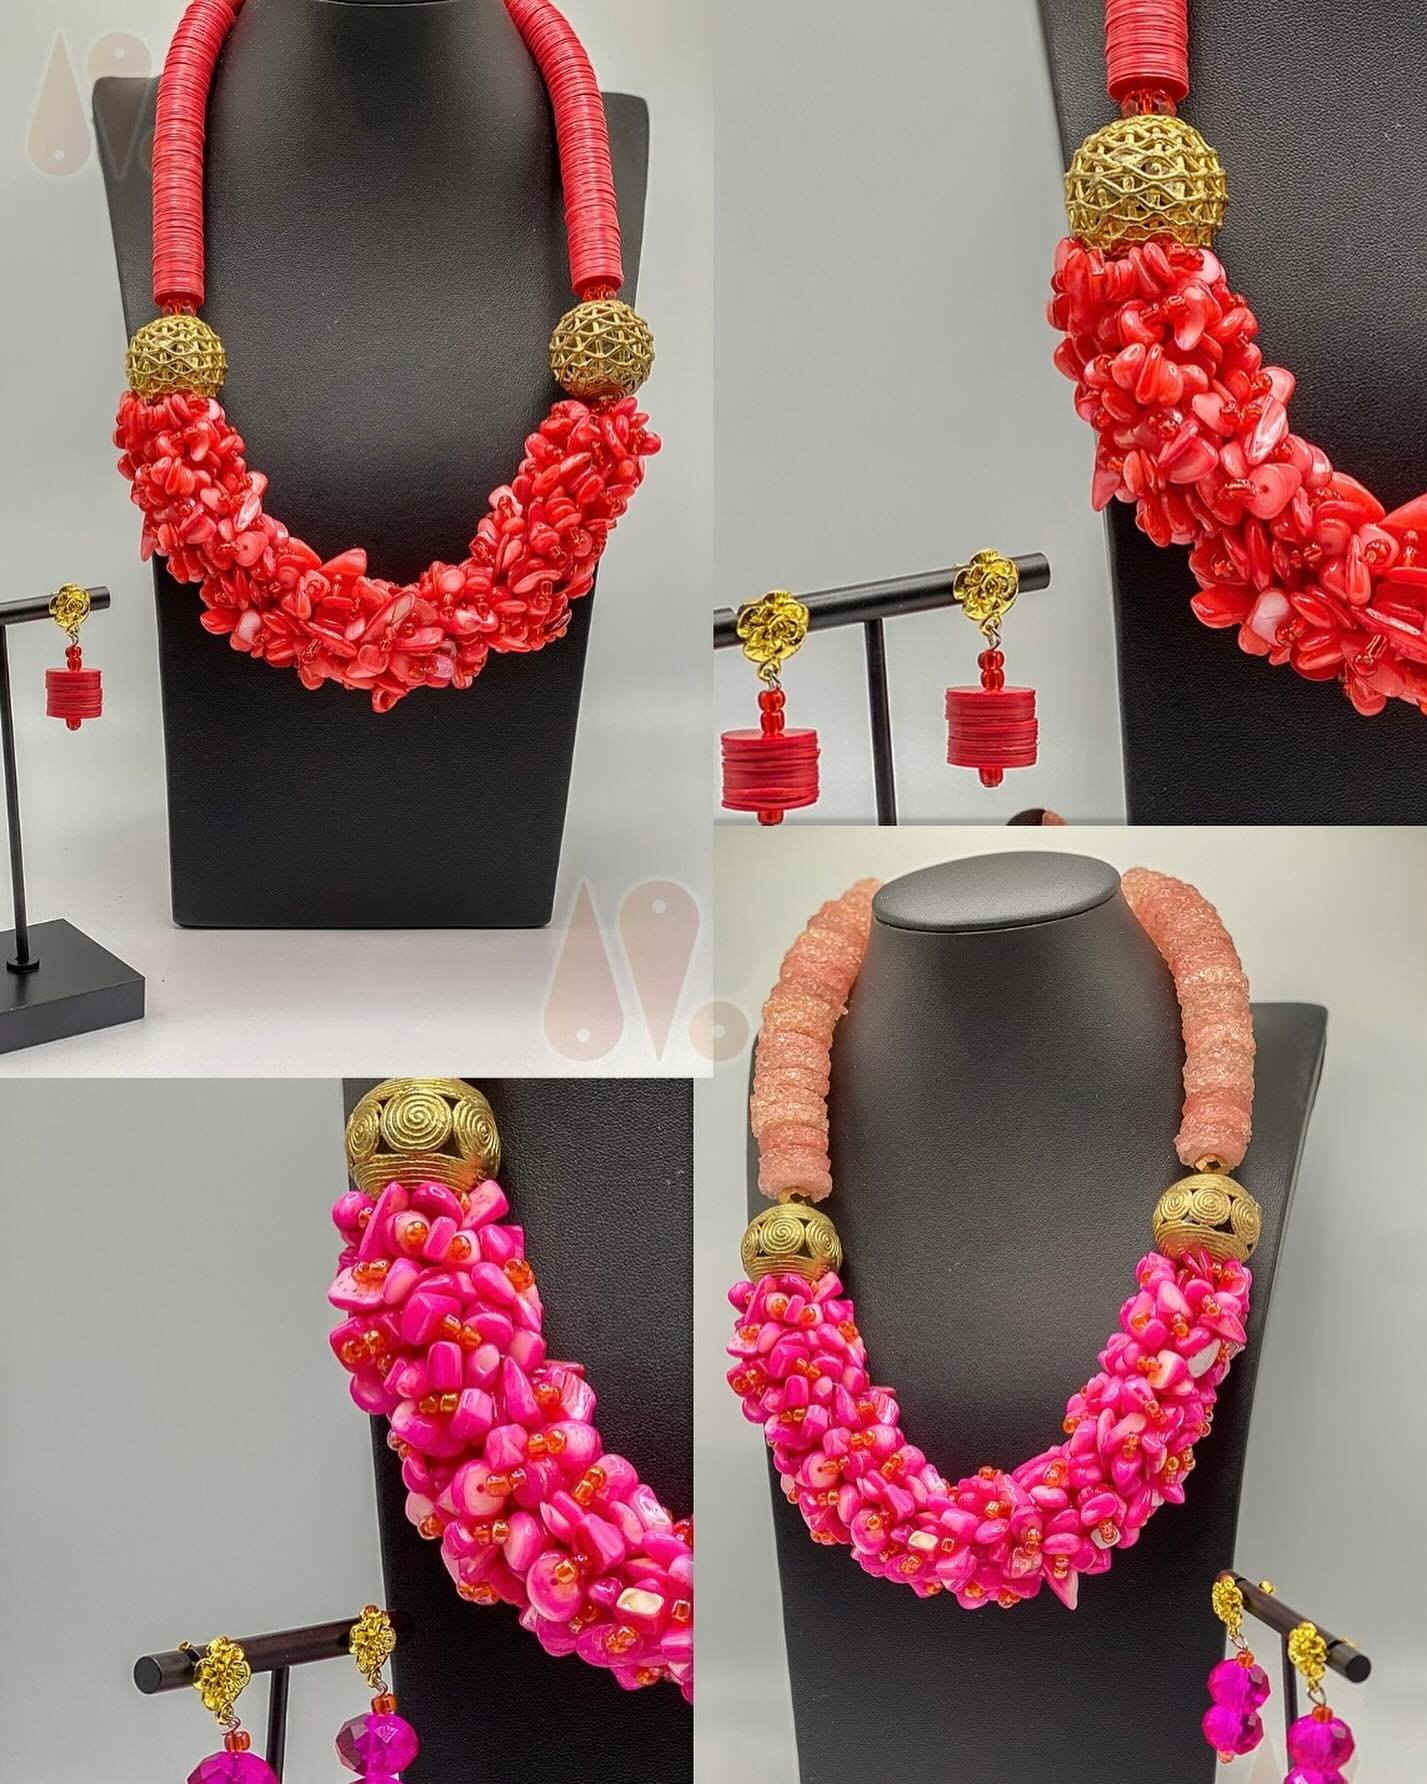 ✨Make a statement with this eye-catching beaded necklace! Crafted with chip stones, vinyl, and brass pieces in vibrant red and pink shades.❤️💕

NB: Pieces are all SOLD OUT🚫

Visit our website for stunning array of beautiful beads⬇️

📍Website link: